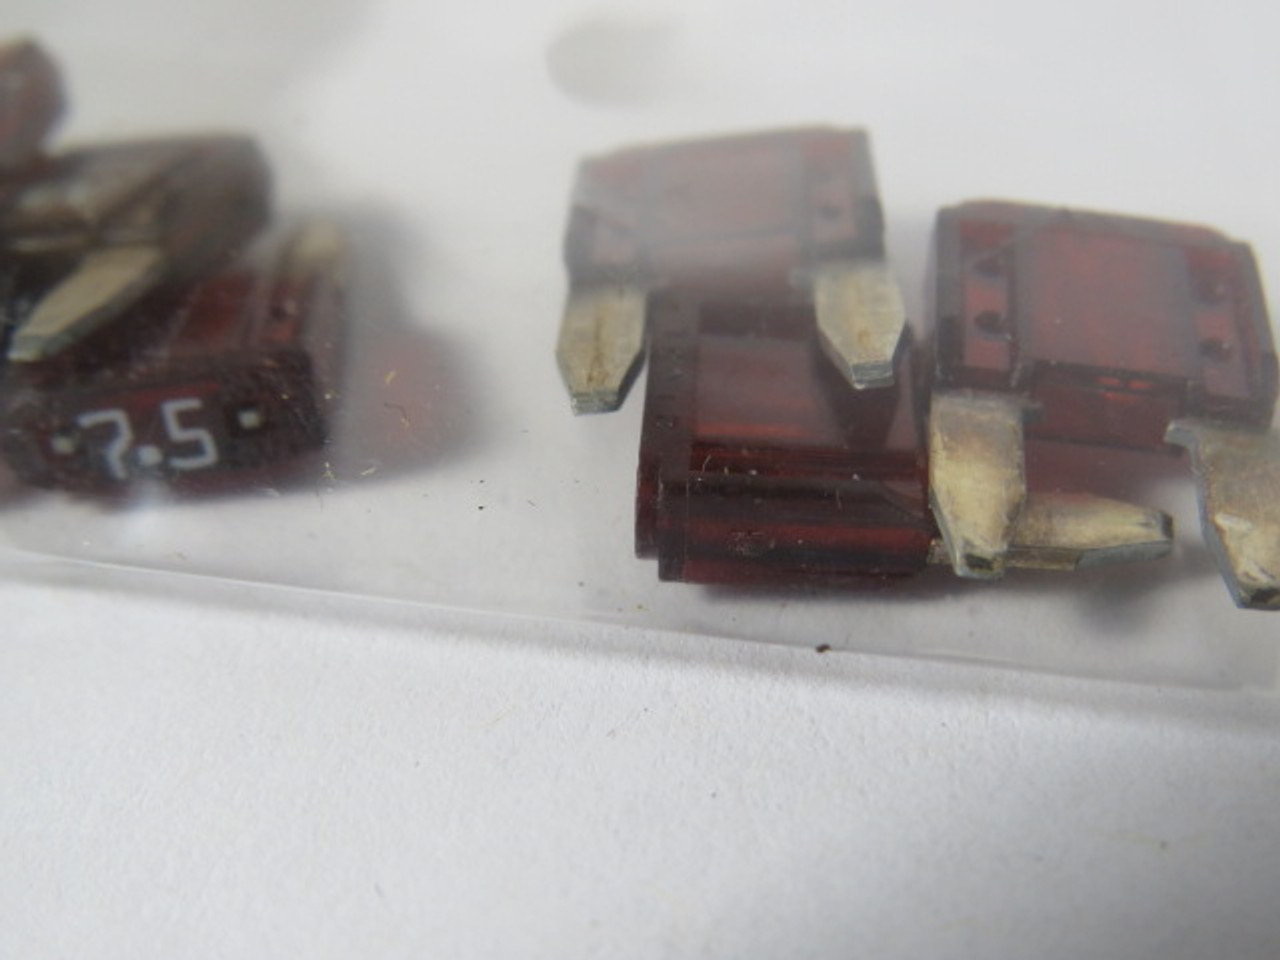 Littelfuse 029707.5 MINI 32V Brown Blade Fuse 7.5A 2 Blade Lot of 8 USED